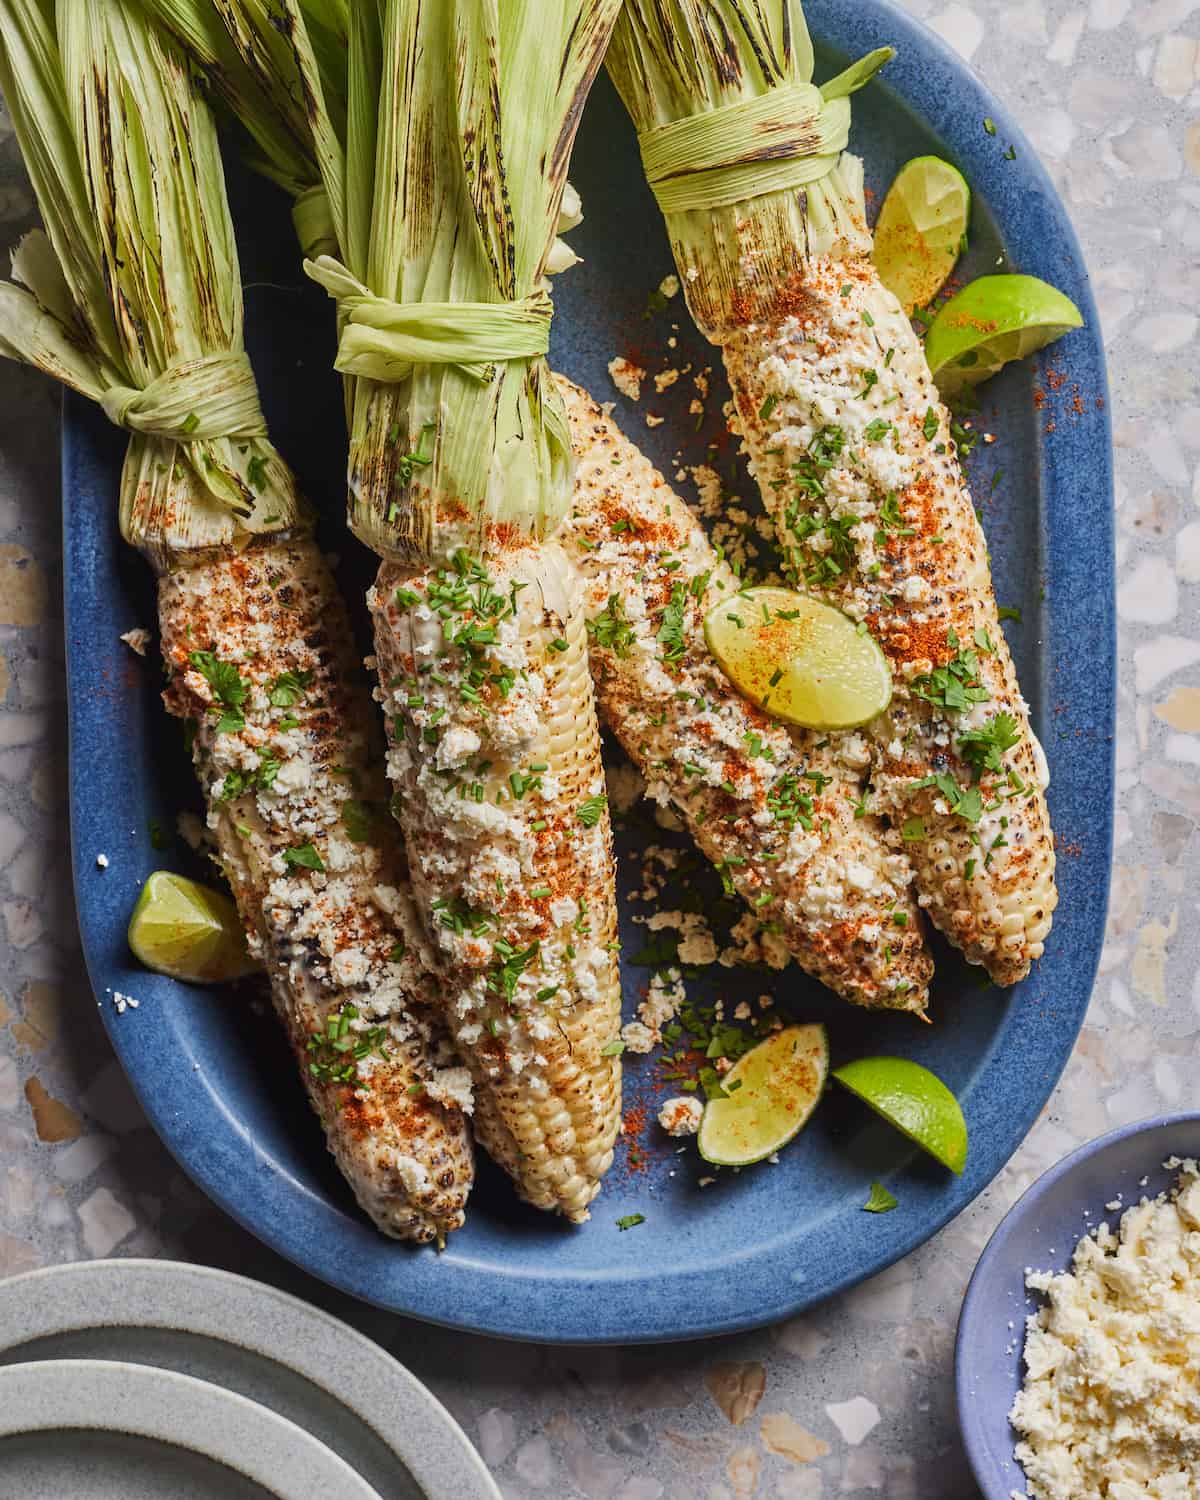 4 grilled cobs of corn covered in feta, cilantro and chili mixture placed on a blue oval platter, with lime wedges, with a small bowl of feta and a couple small plates on the side.